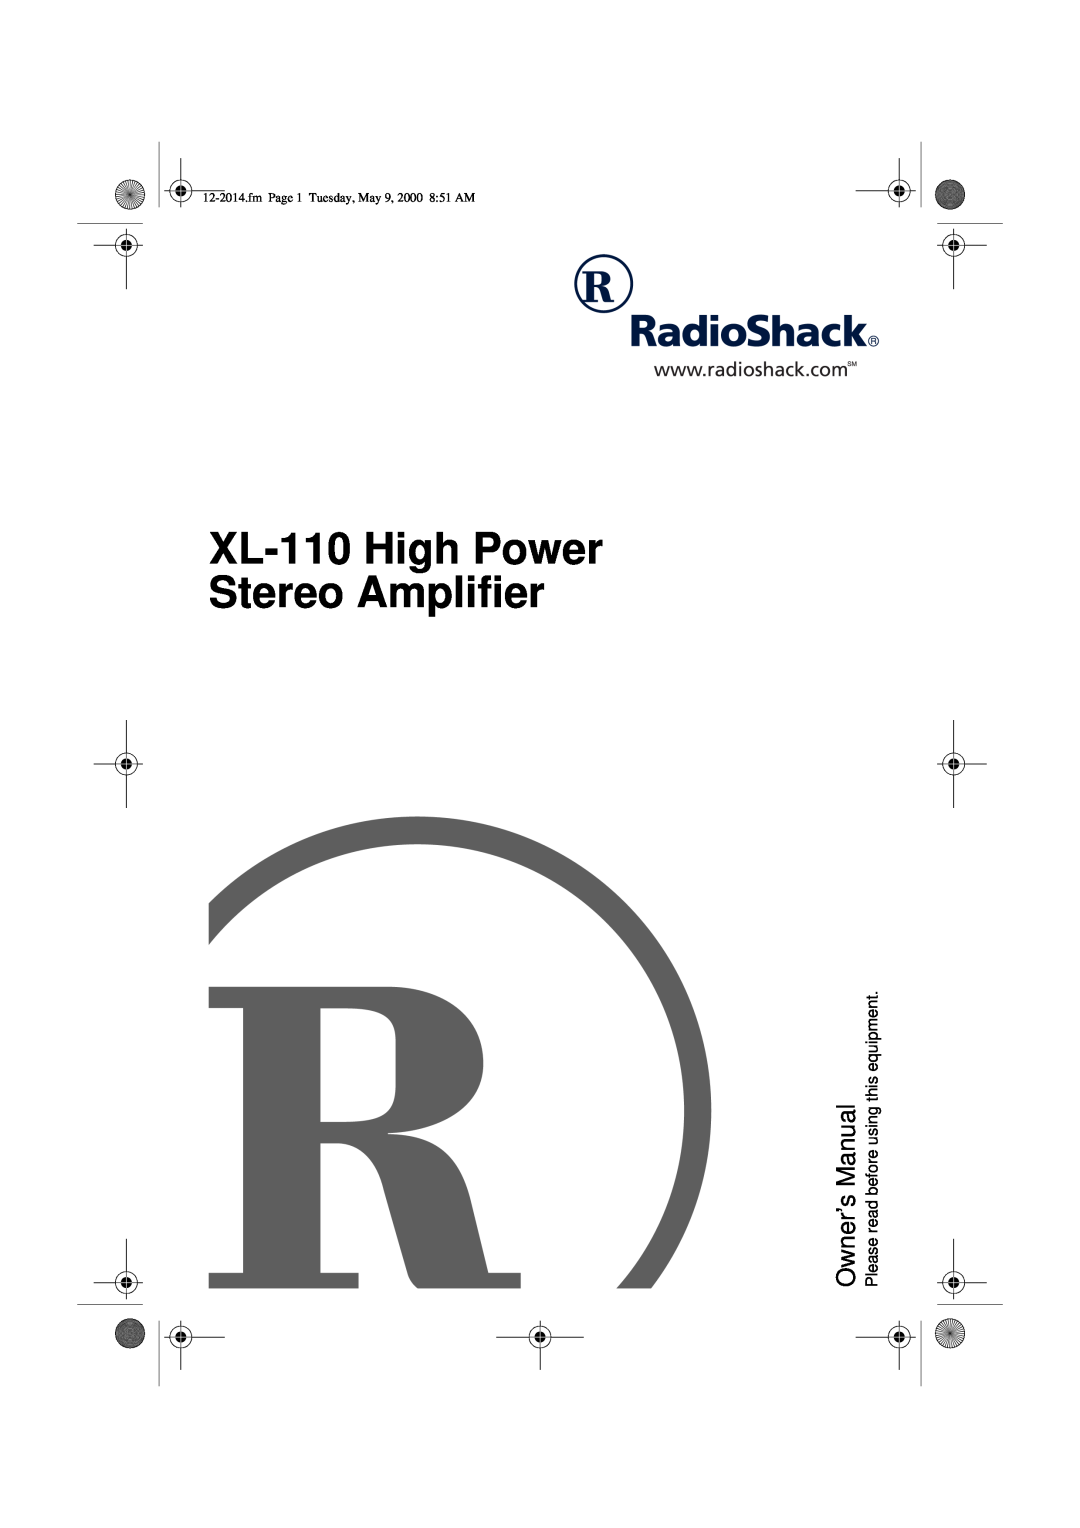 Radio Shack owner manual XL-110High Power Stereo Amplifier, fmPage 1 Tuesday, May 9, 2000 8 51 AM 